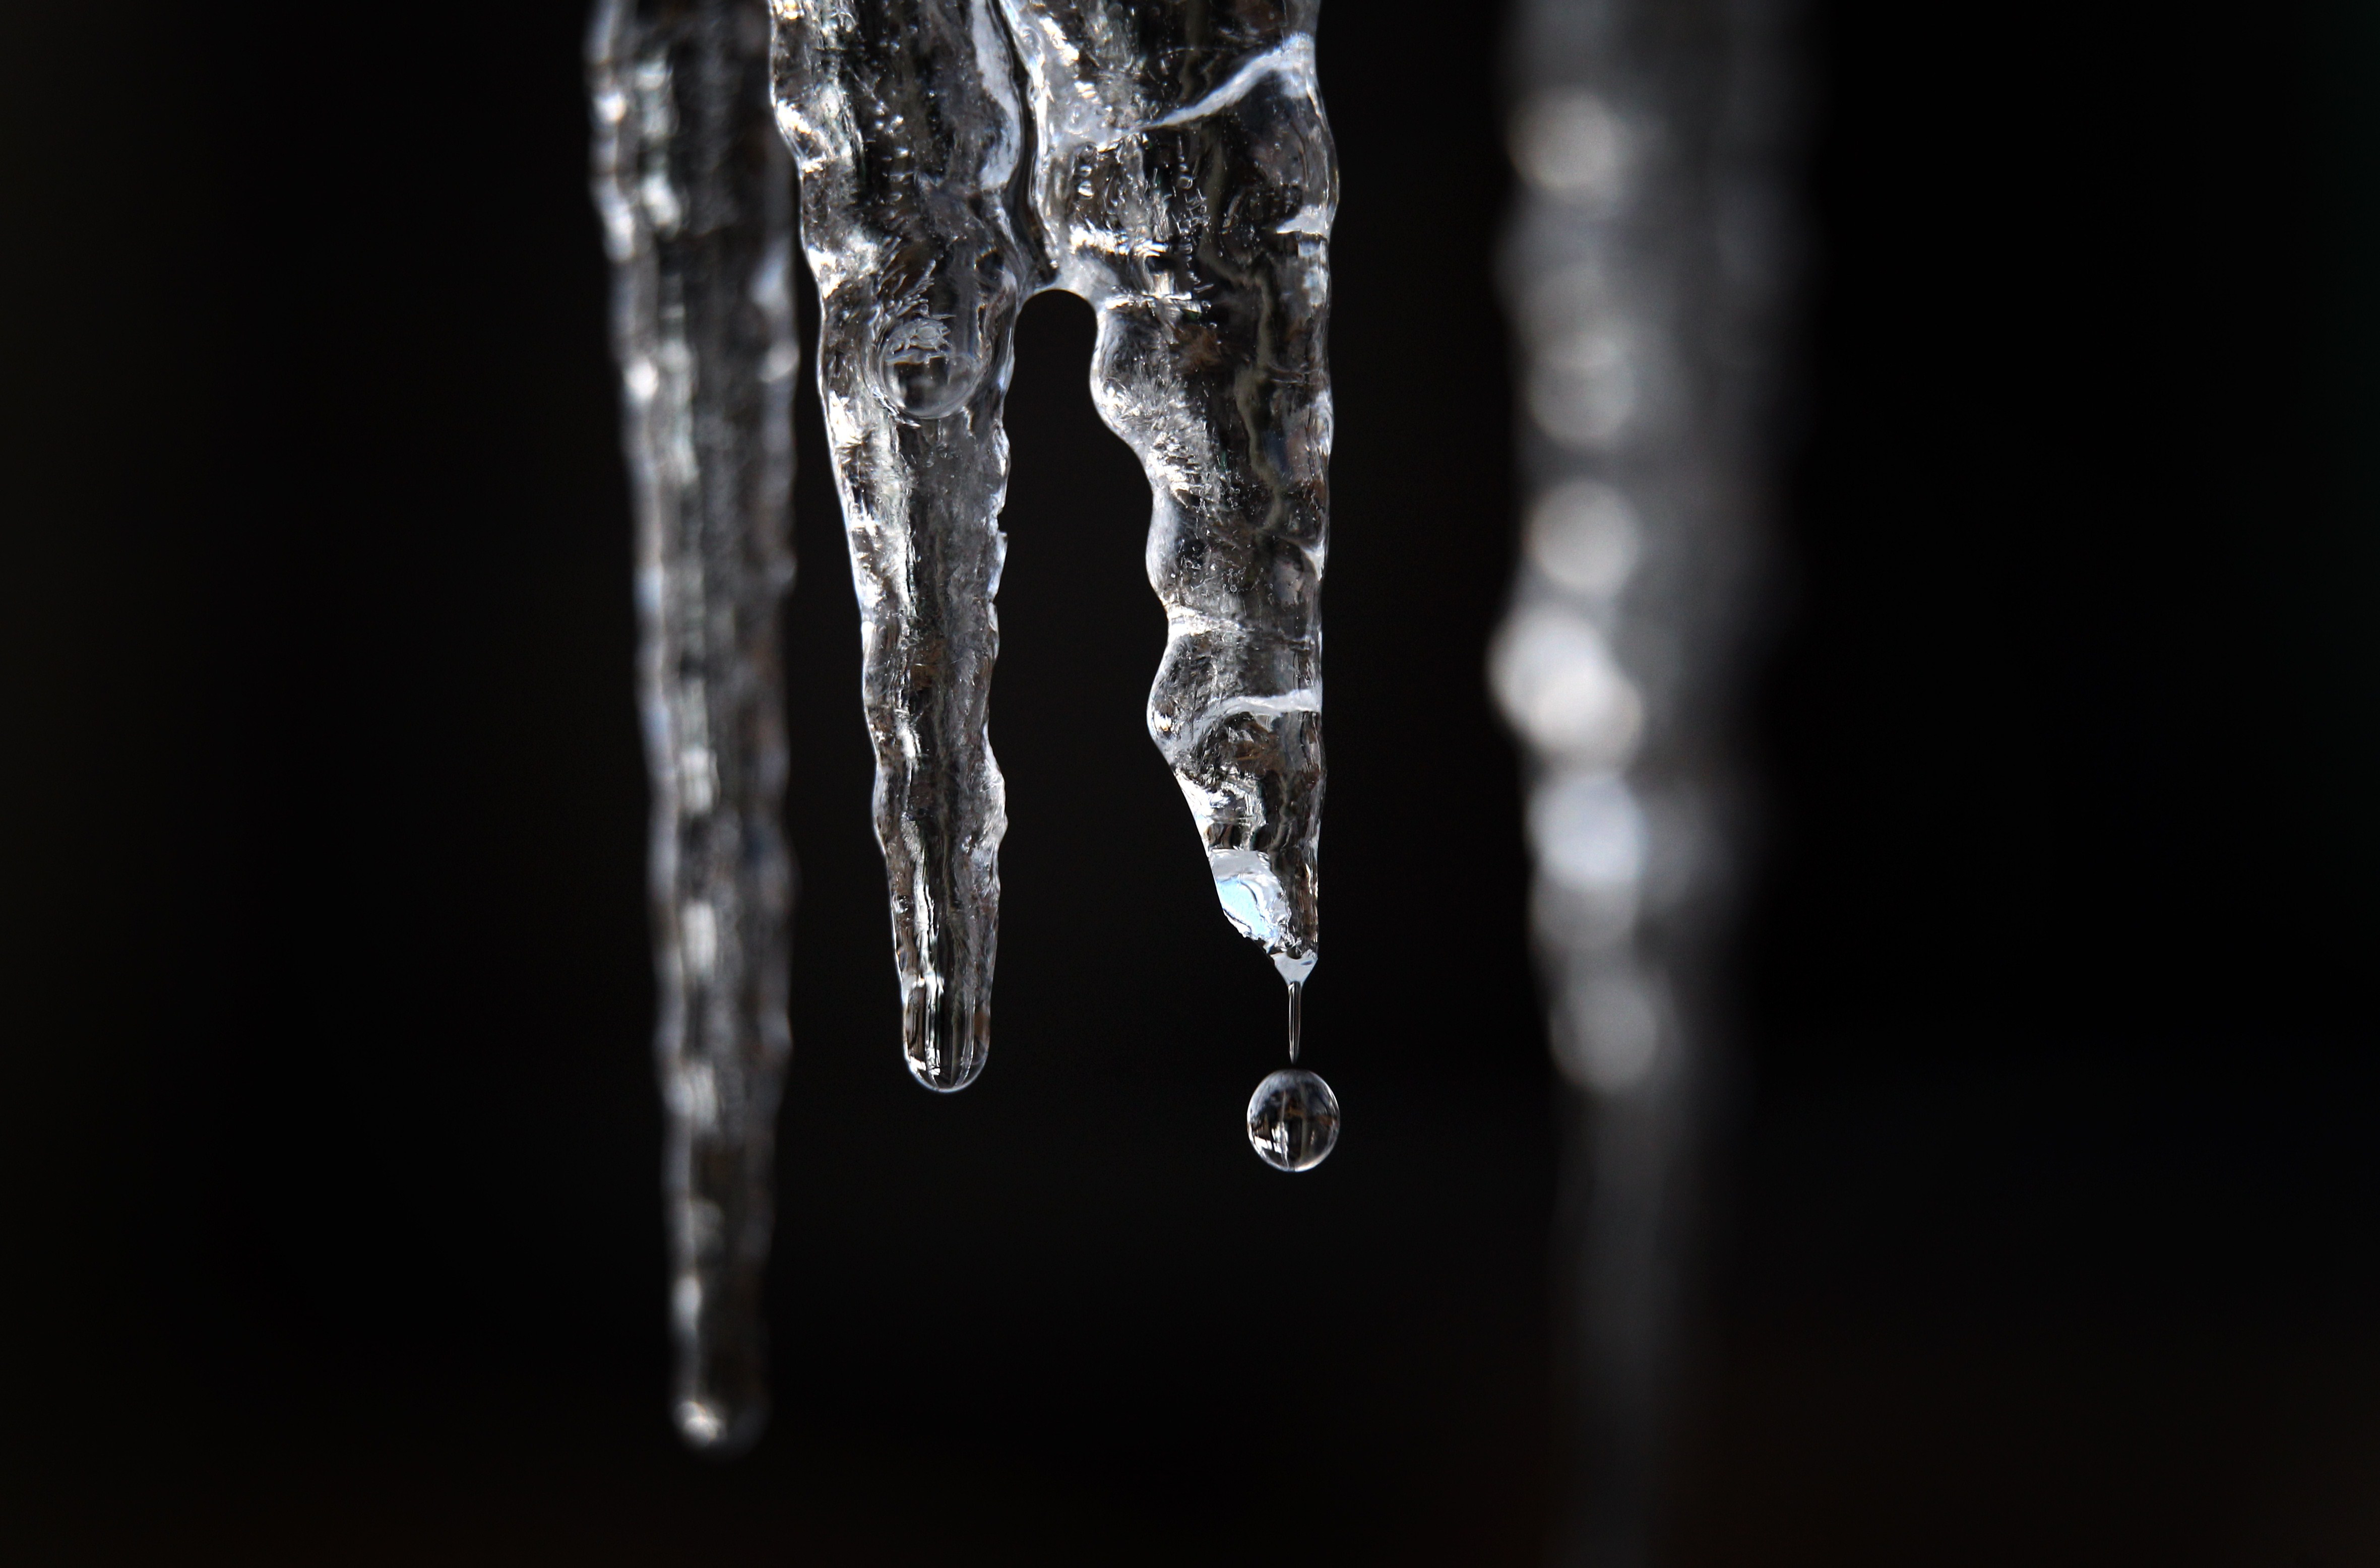 A drop of water falls from a melting icicle on Feb. 1, 2015 in Marktoberdorf, southern Germany. (Karl-Josef Hildenbrand—AFP/Getty Images)